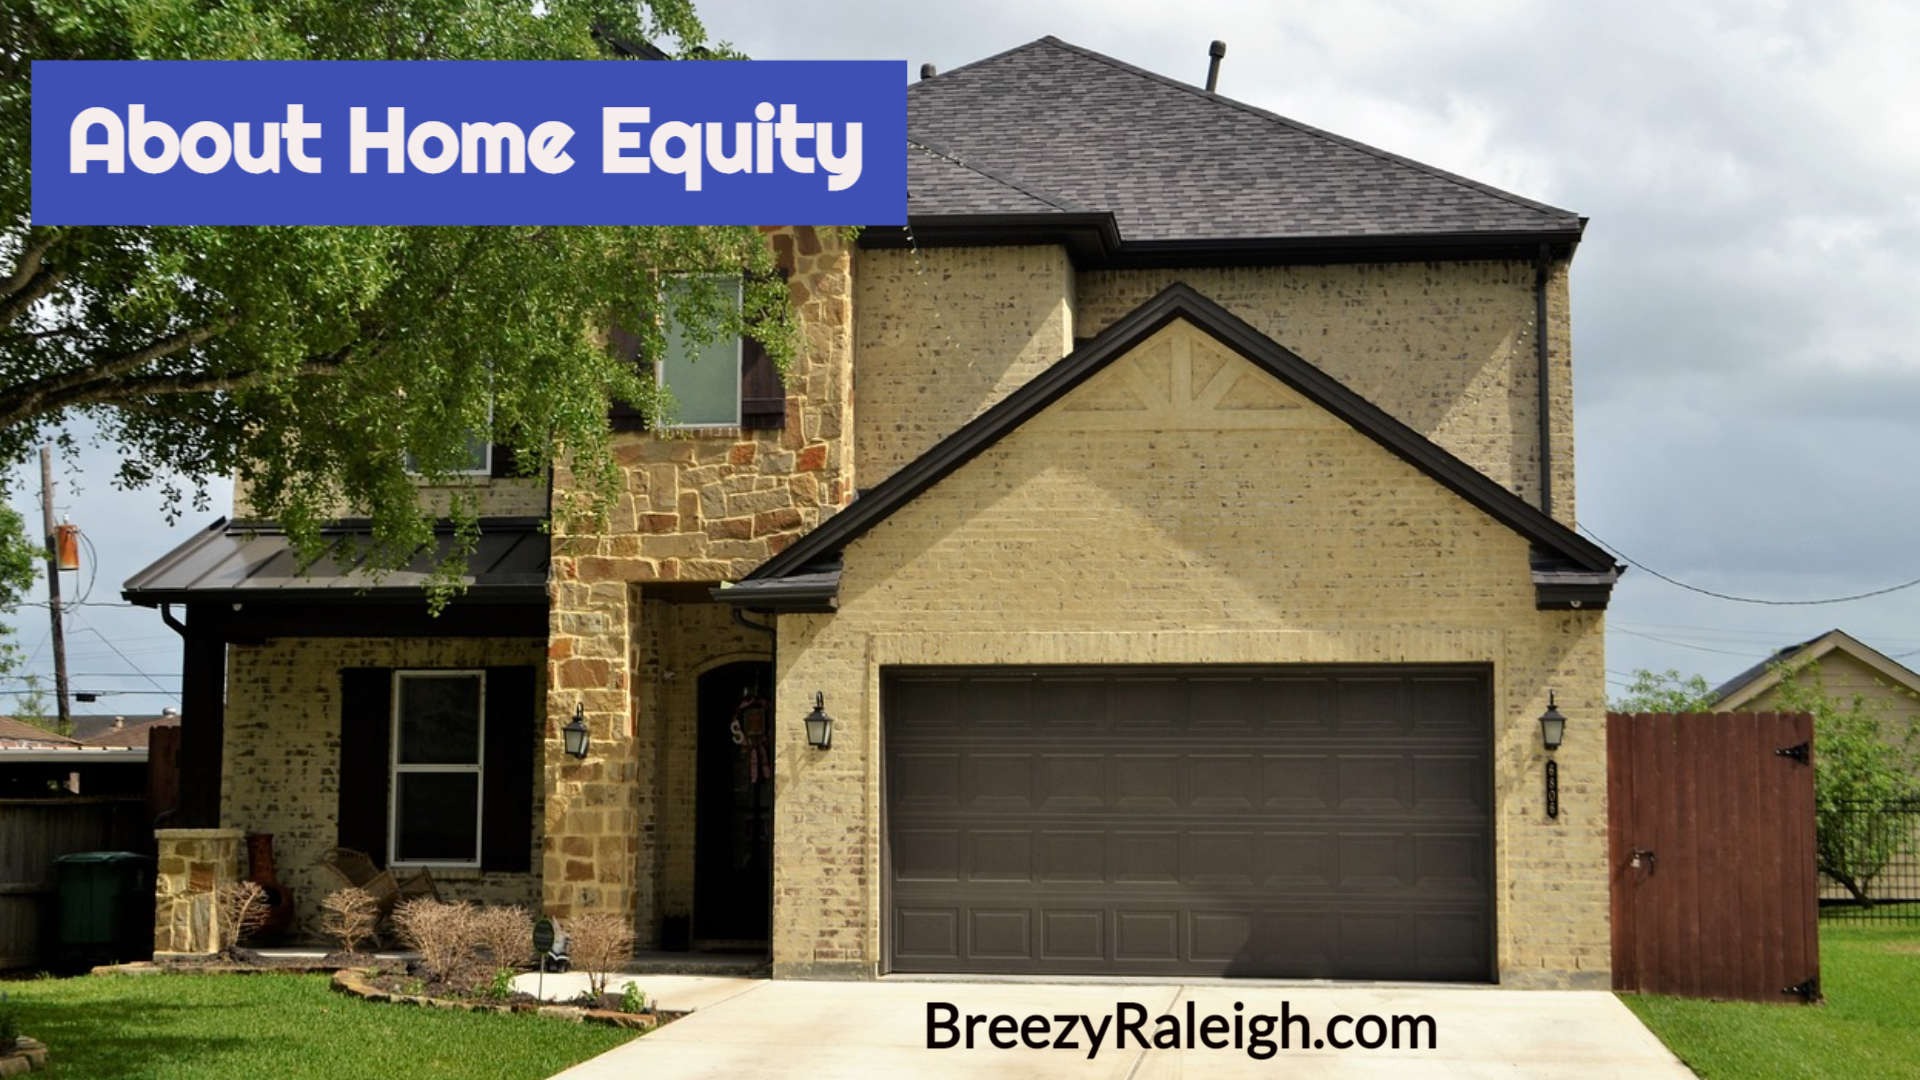 About Home Equity